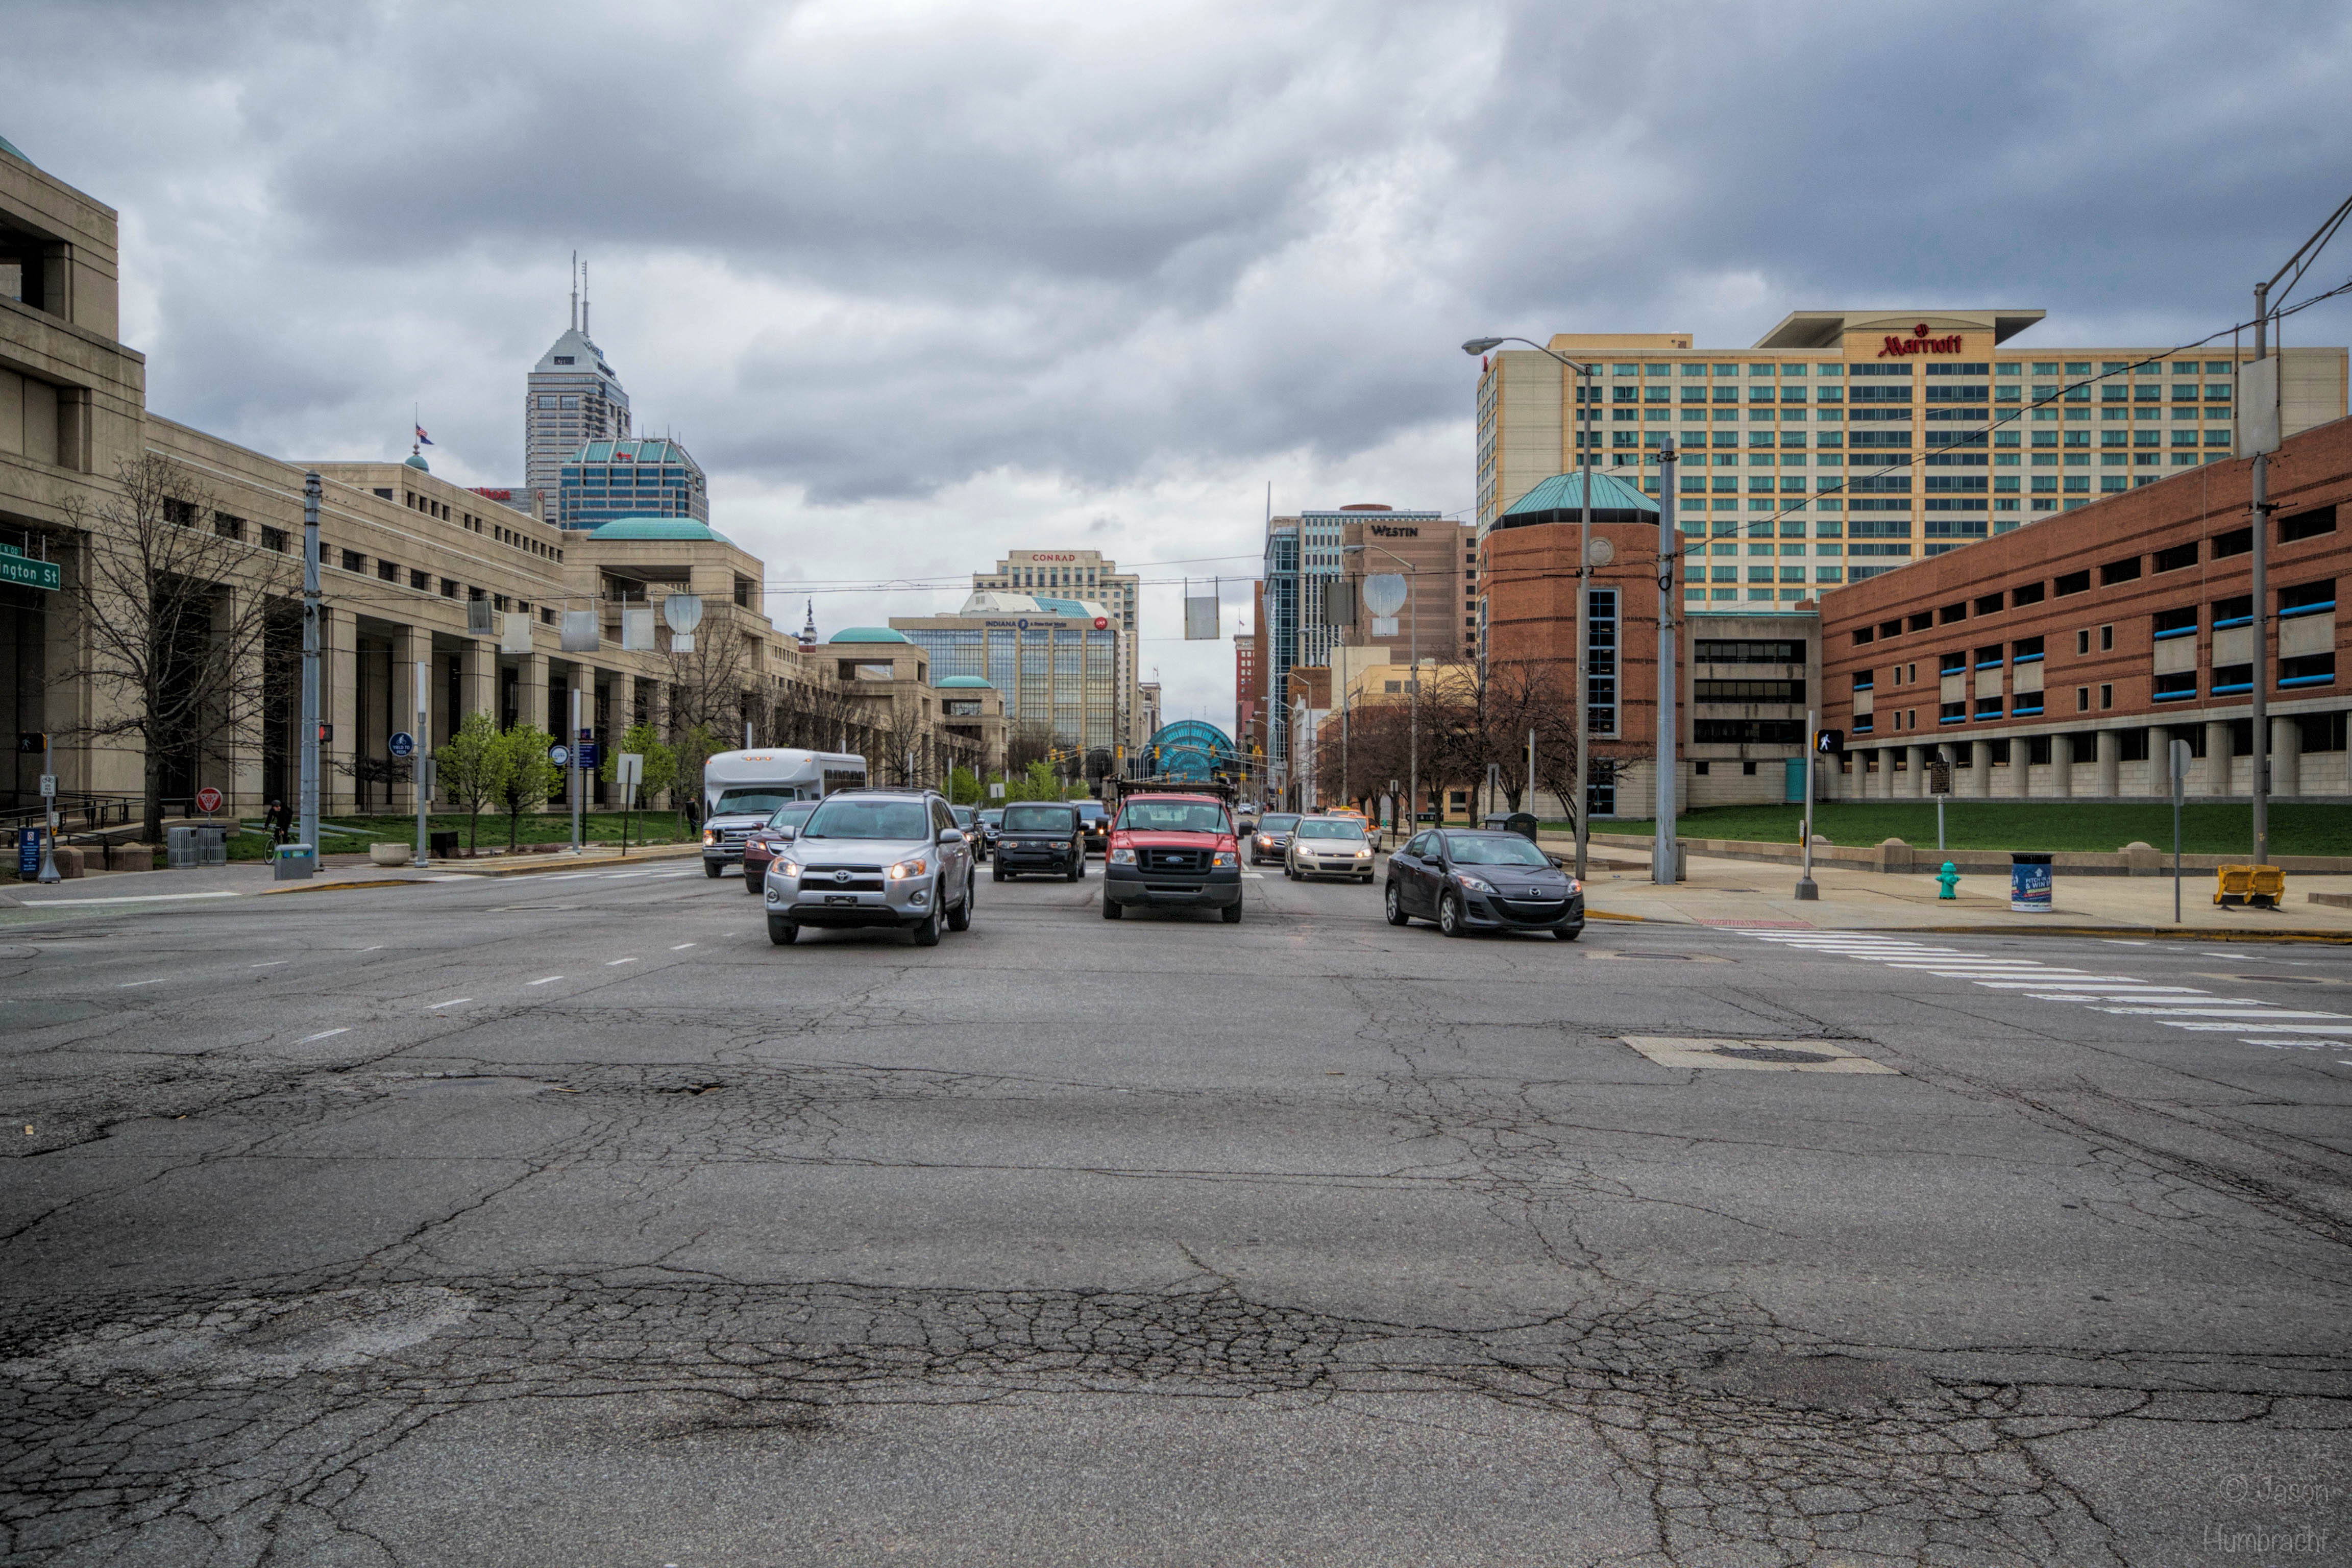 Oncoming Traffic | Indianapolis, Indiana | Street Photography | Indiana Architecture | Image By Indiana Architectural Photographer Jason Humbracht